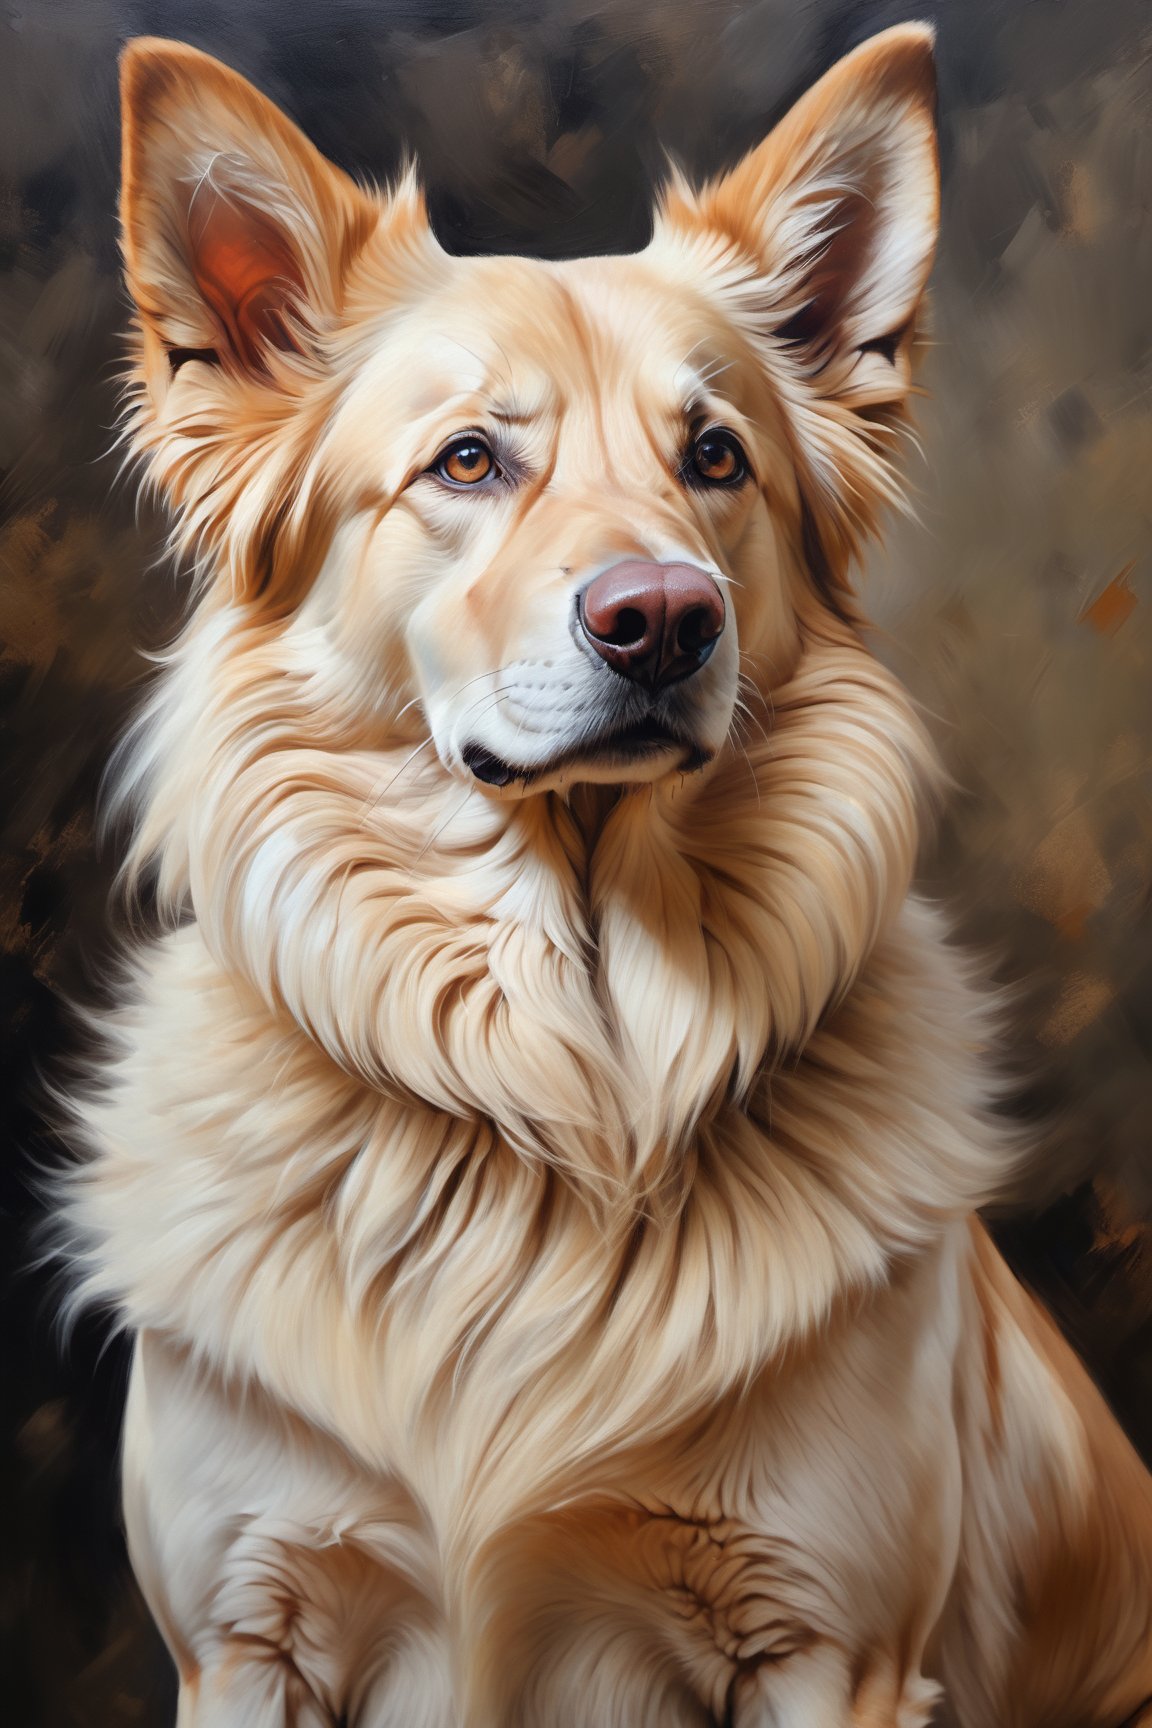 (oil paint, dog),(best quality,4k,8k,highres,masterpiece:1.2),ultra-detailed,(realistic,photorealistic,photo-realistic:1.37),enhanced colors,vivid brushstrokes,detailed fur texture,expressive eyes,strong contrast,natural lighting,classic style,loyal companion,playful expression,paw on a canvas,diverse brush sizes,soft fur texture,painting in progress,varied color palette,texture details on the nose and ears,visible brushstrokes,artistic background,subtle highlights,portrait perspective.